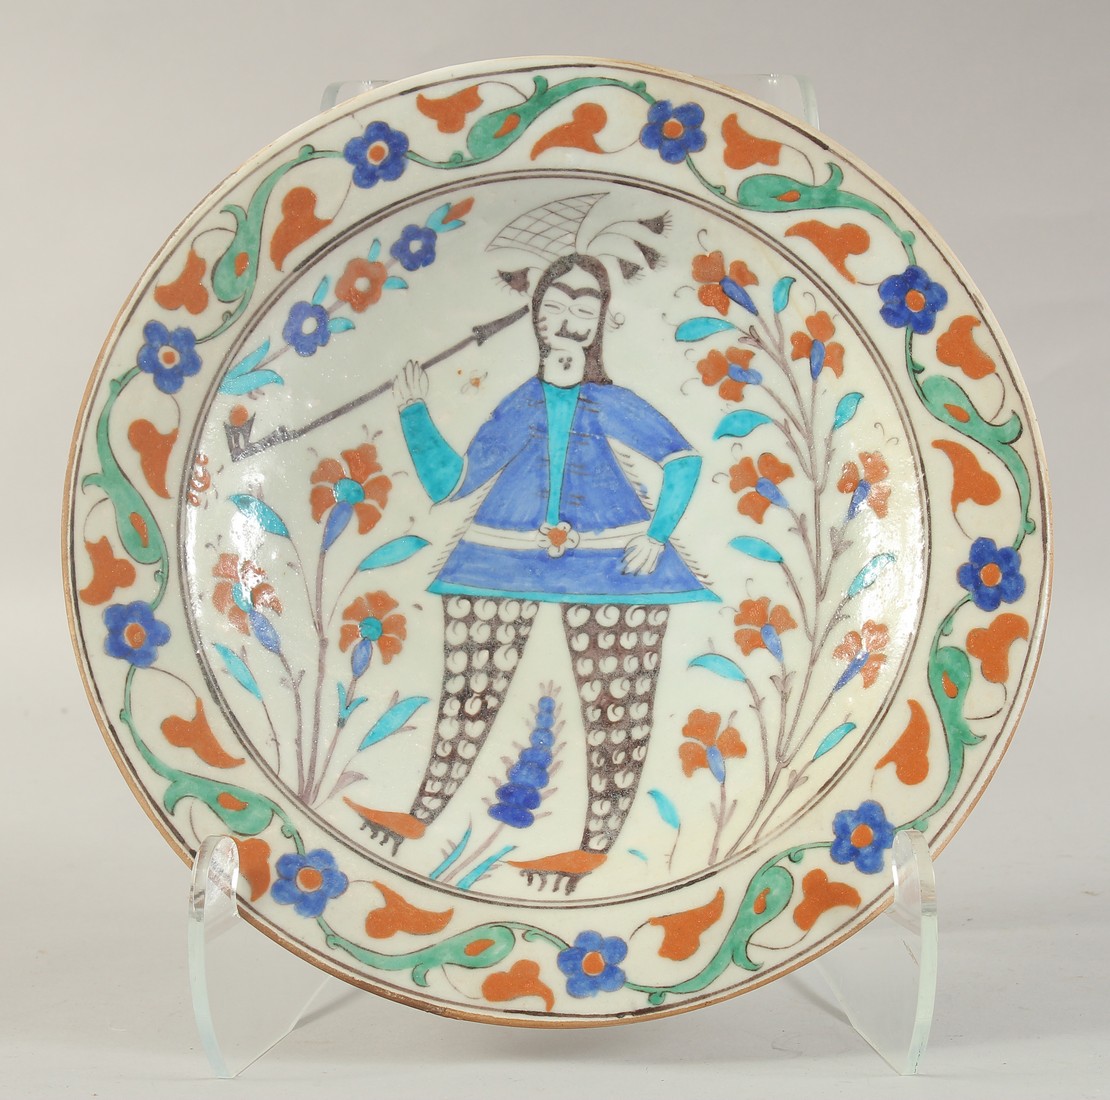 A TURKISH OTTOMAN GLAZED POTTERY PLATE, painted with a figure and flora, 31.5cm diameter.